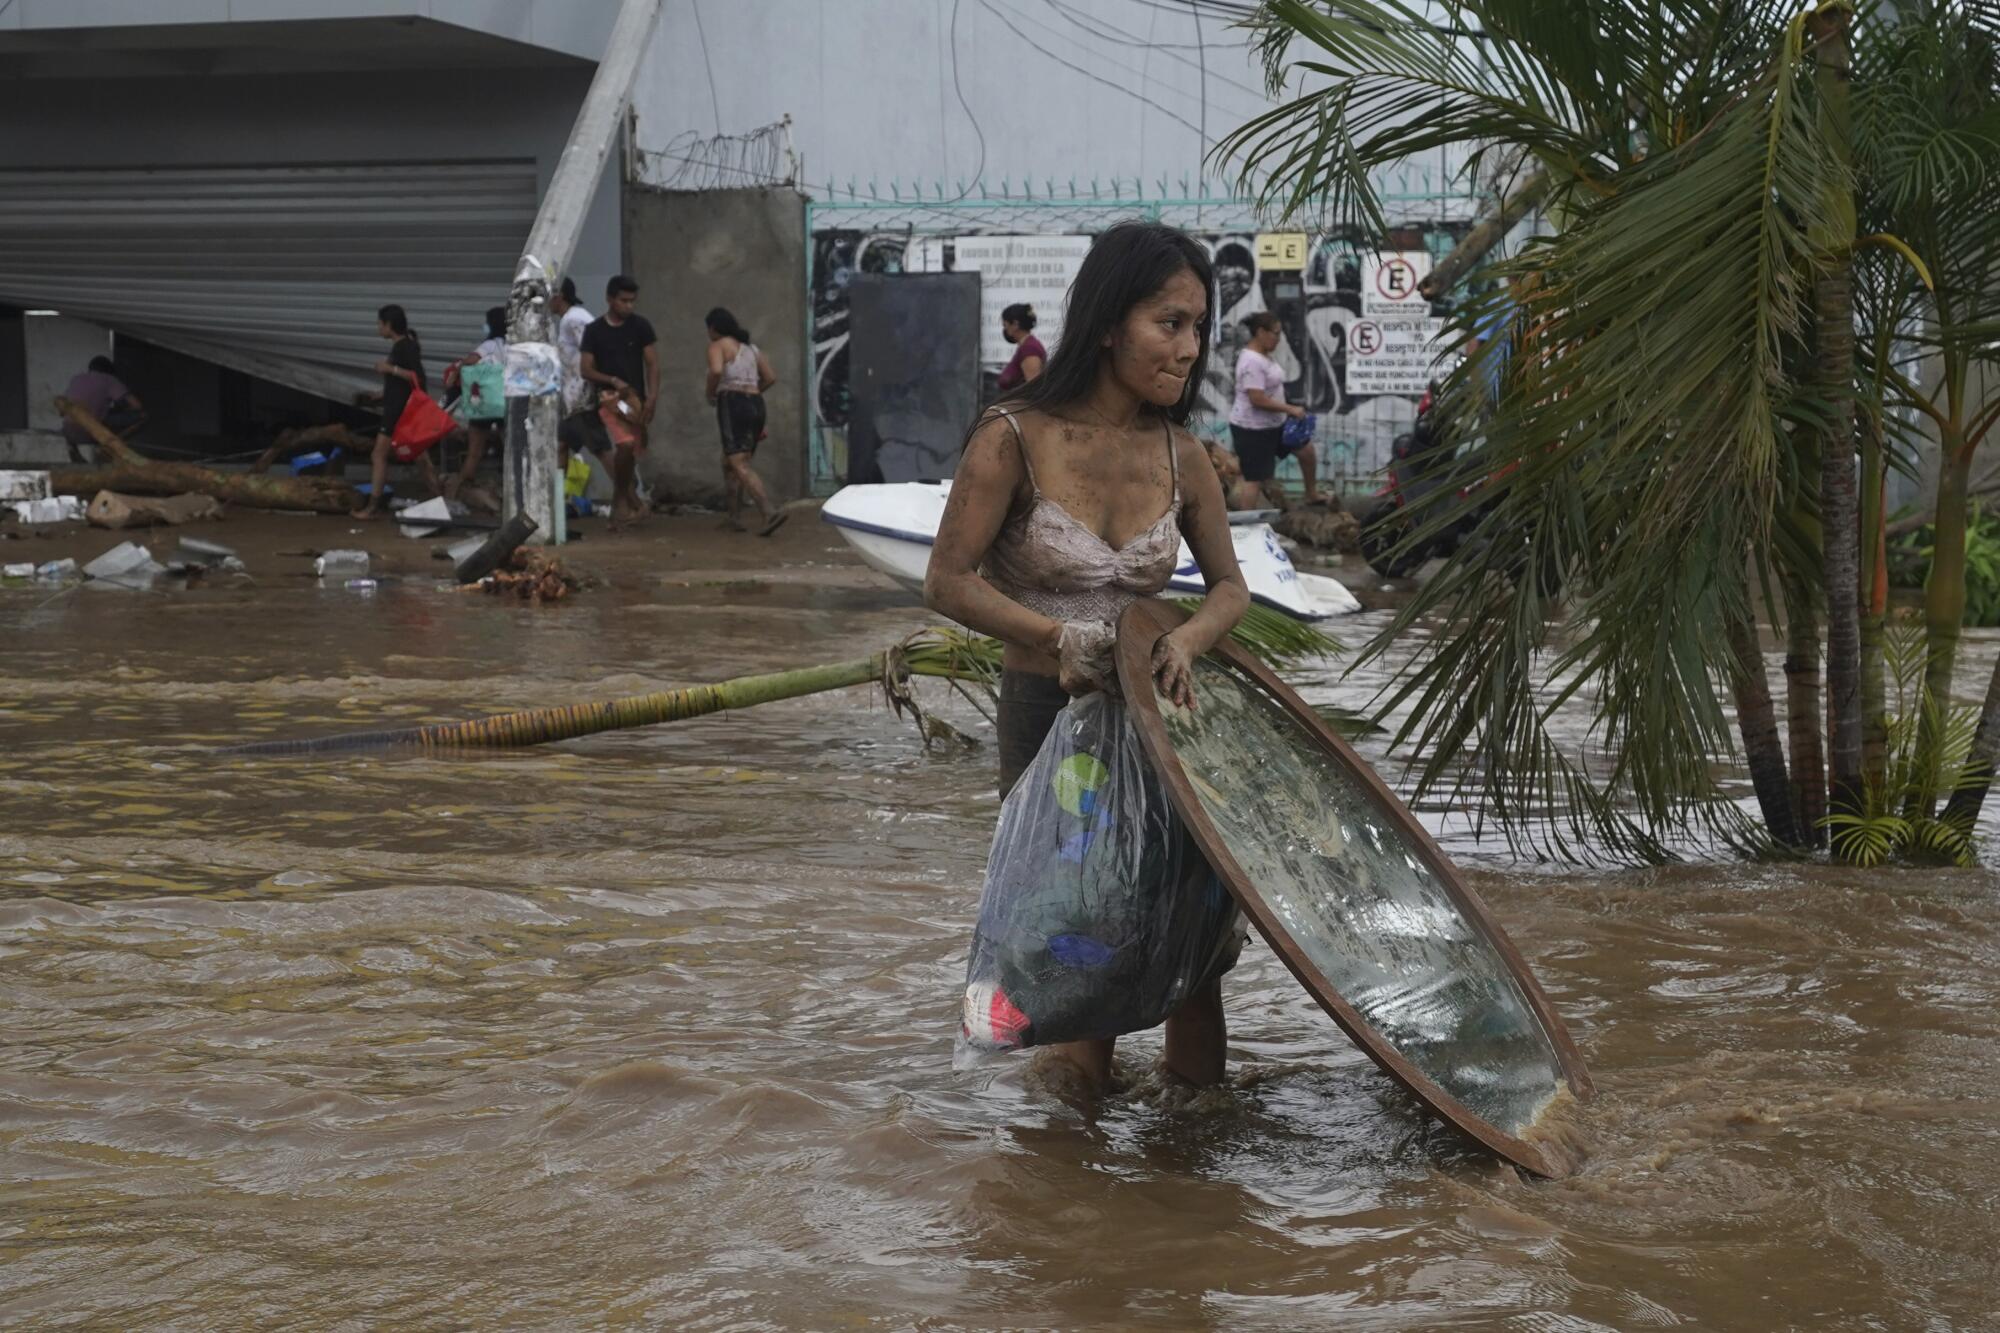 A woman walks through floodwaters in Acapulco